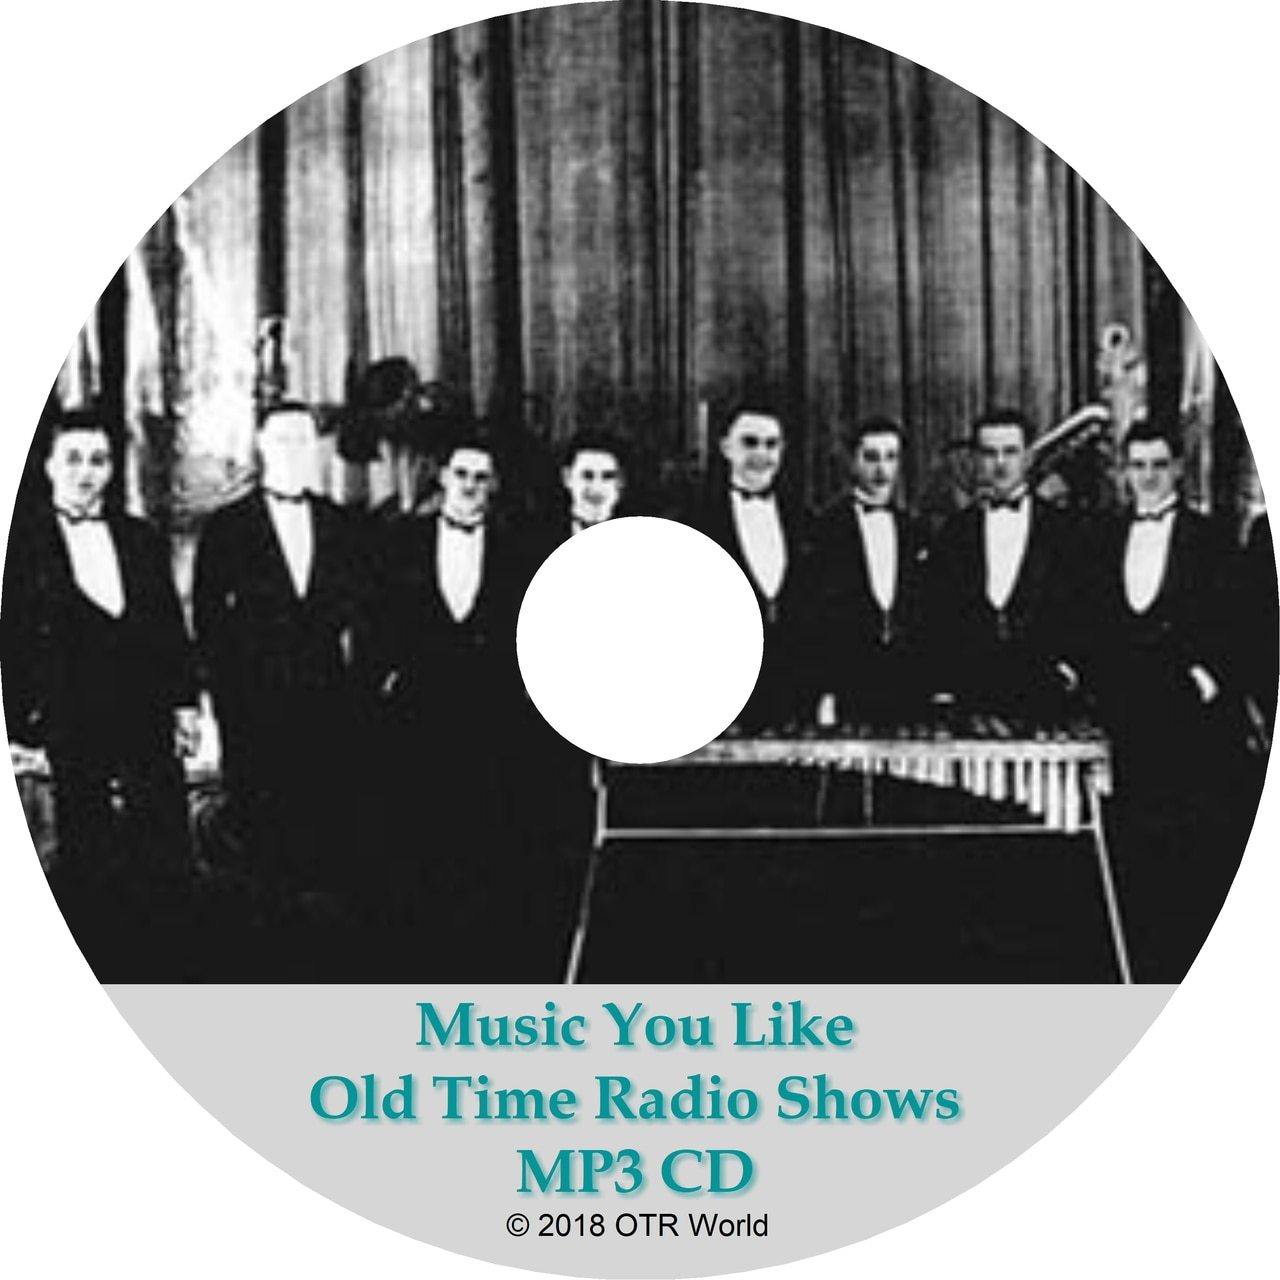 Music You Like Old Time Radio Shows 4 Episodes On MP3 CD - OTR World